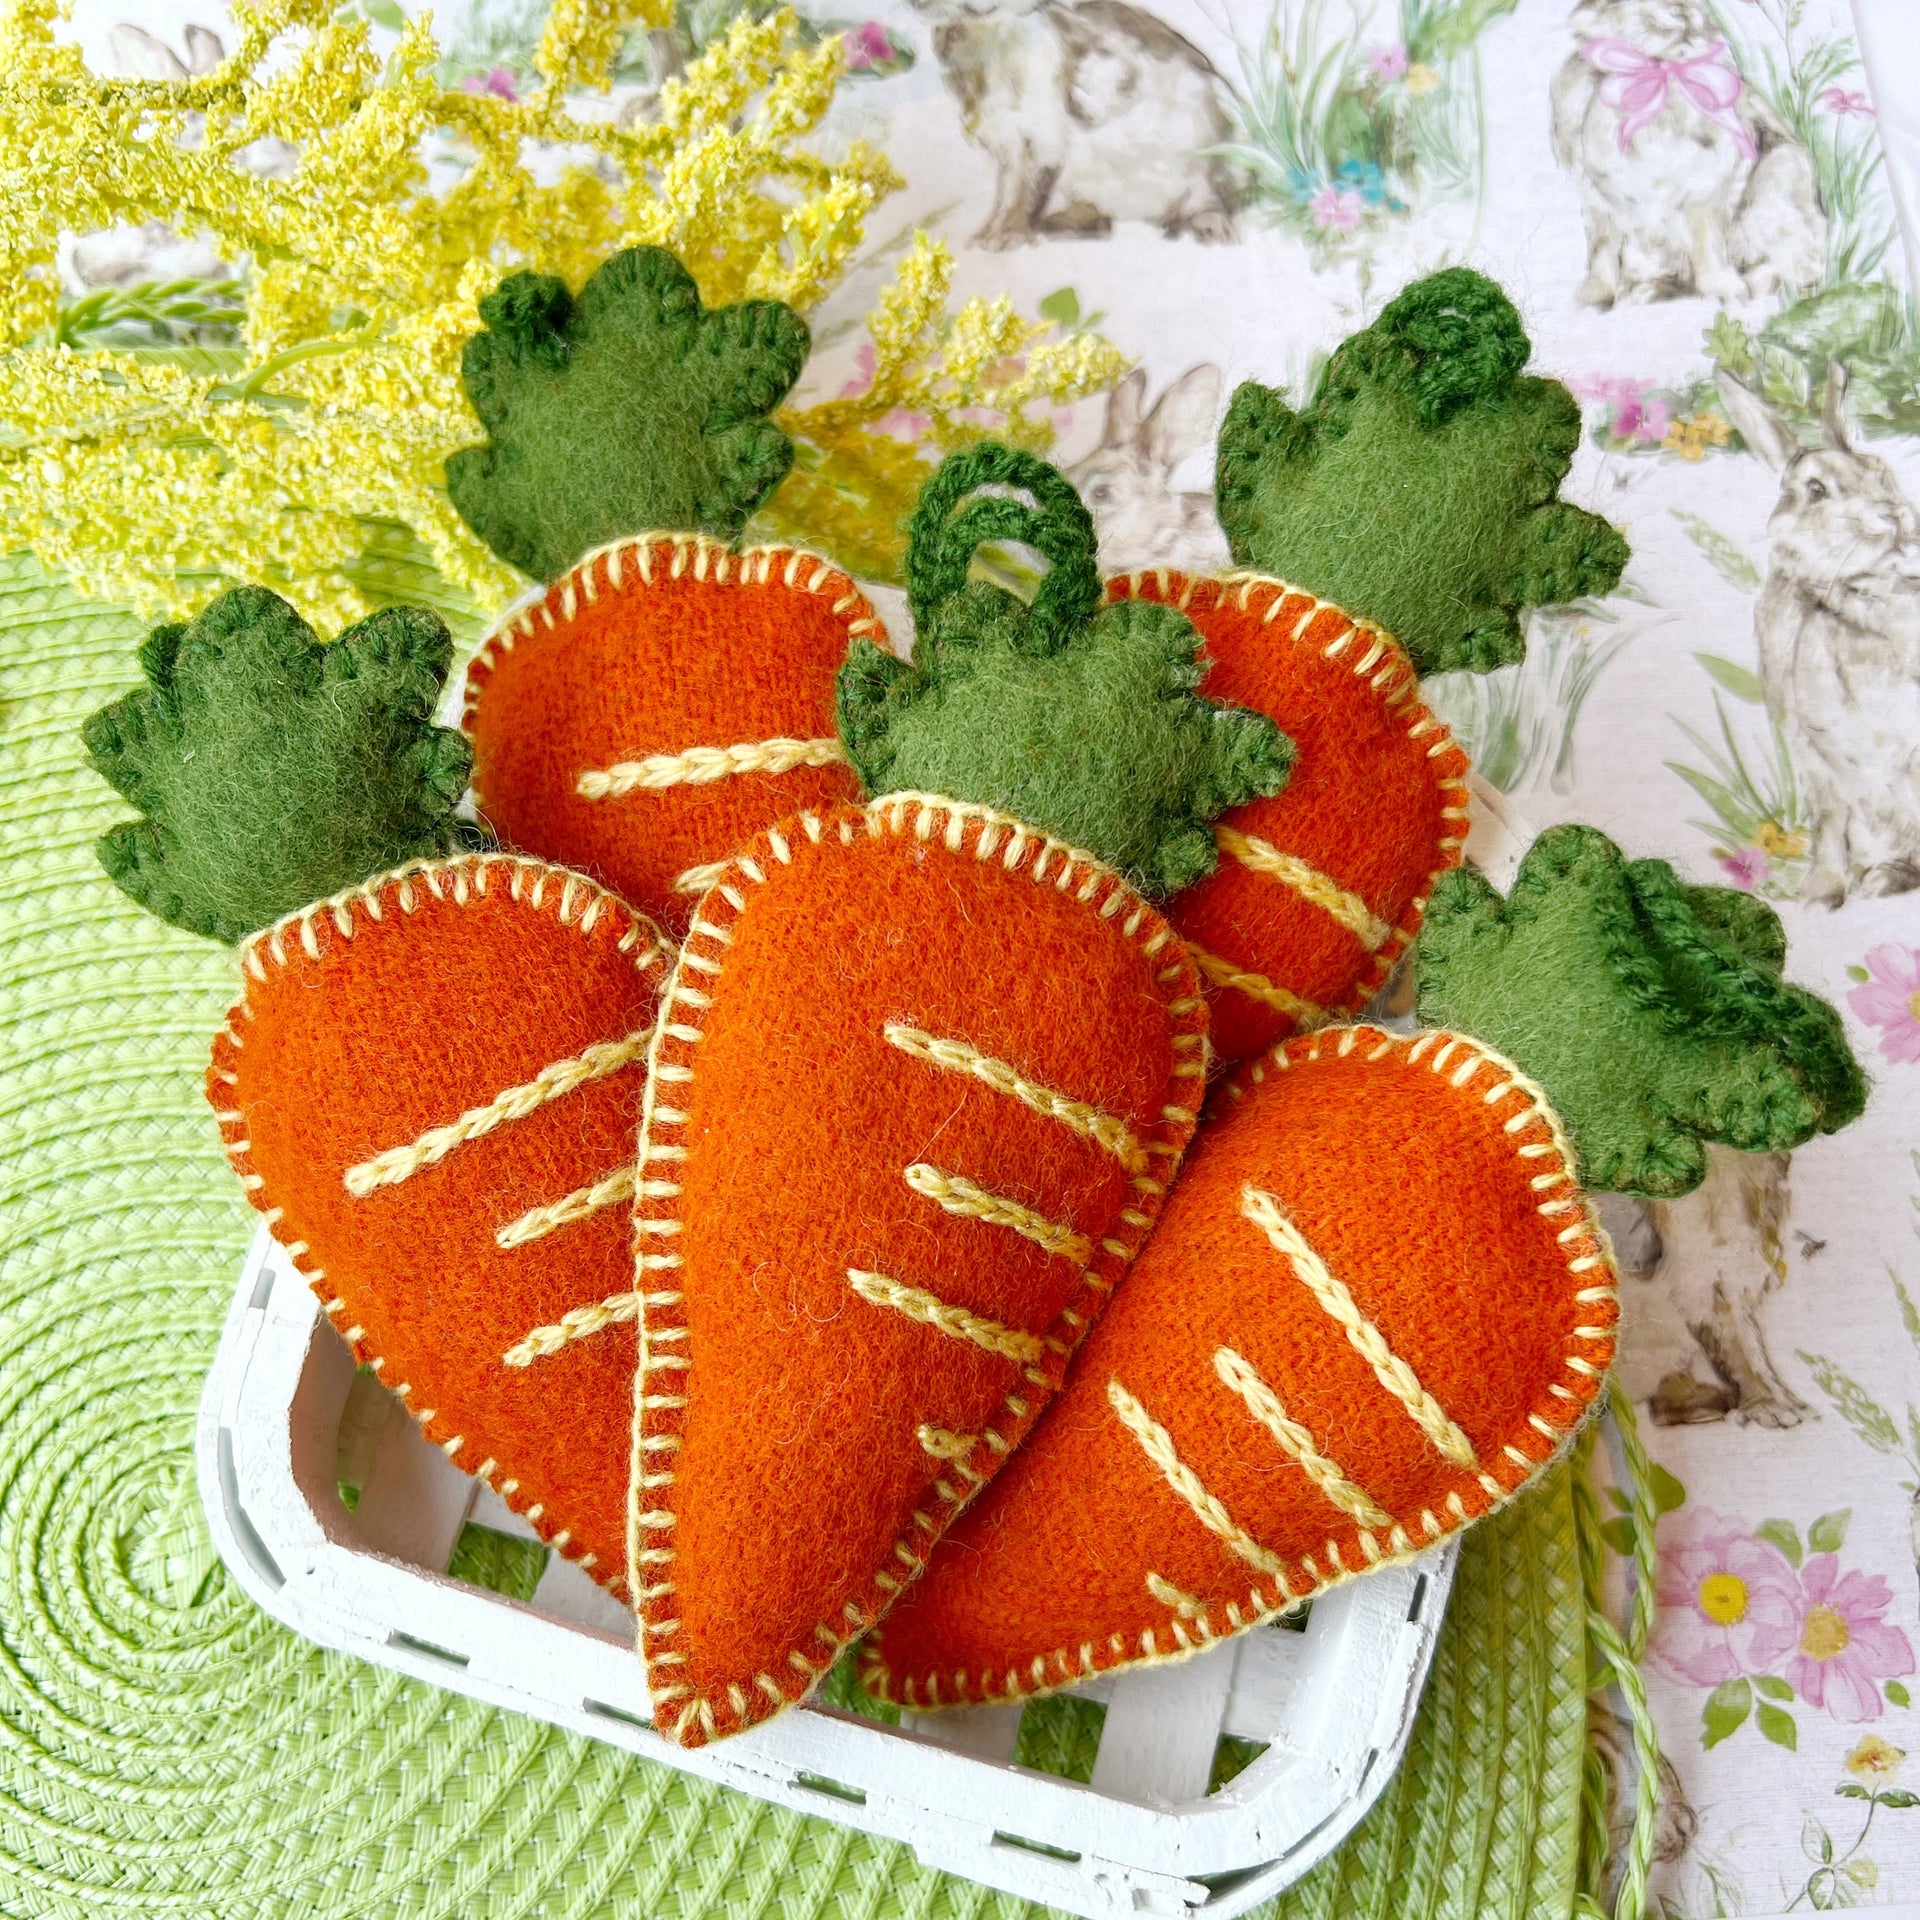 A basket of handmade Carrot Easter ornaments.